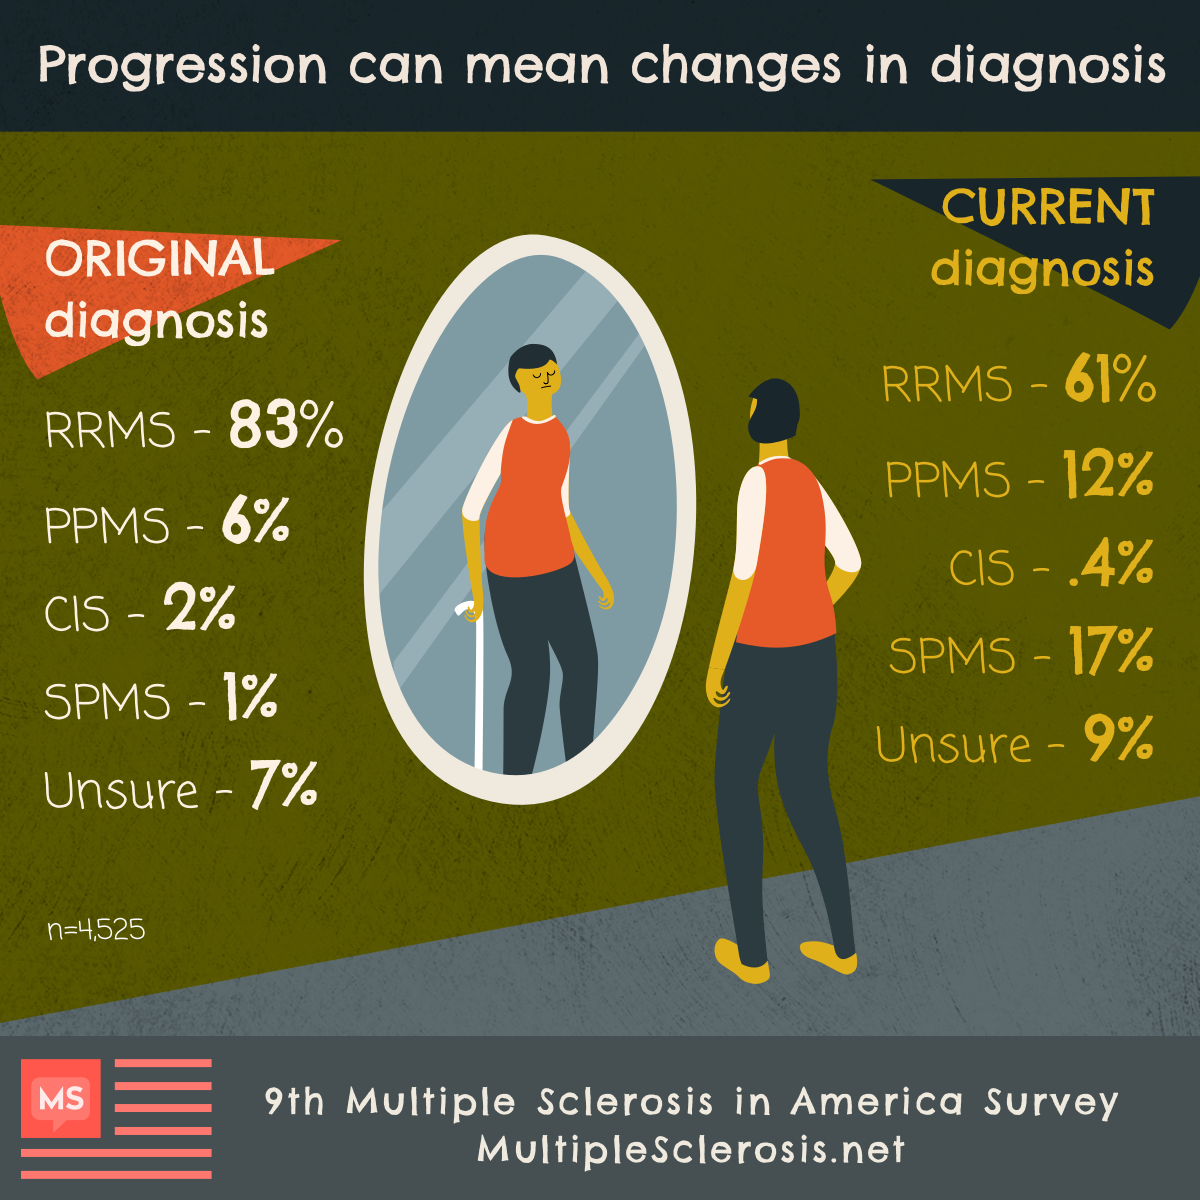 Young person with an orange shirt and dark gray pants is looking into a mirror at an older person with a cane to depict the reality of MS progression. 